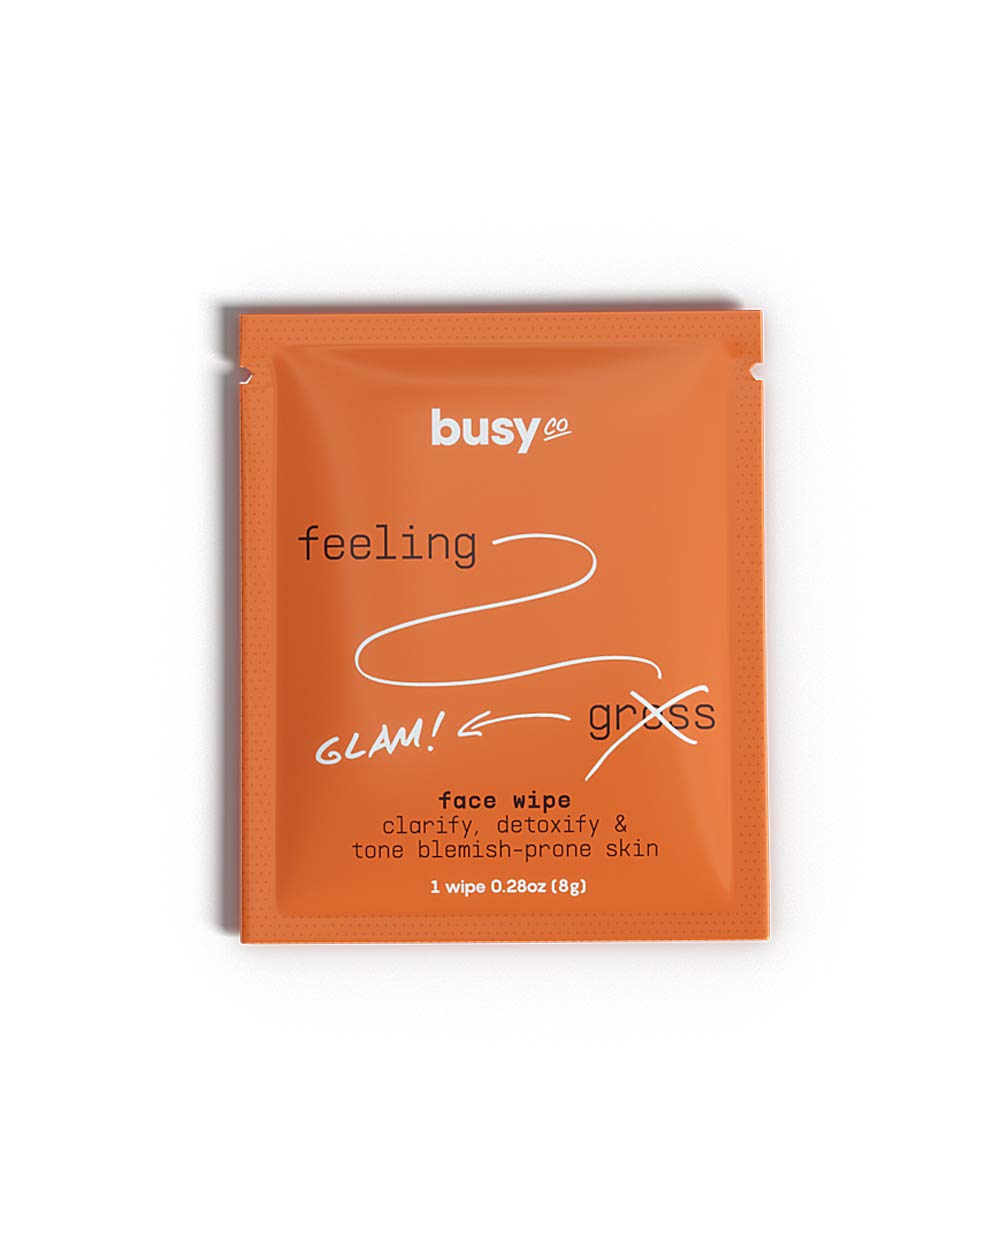 busy co face wipes